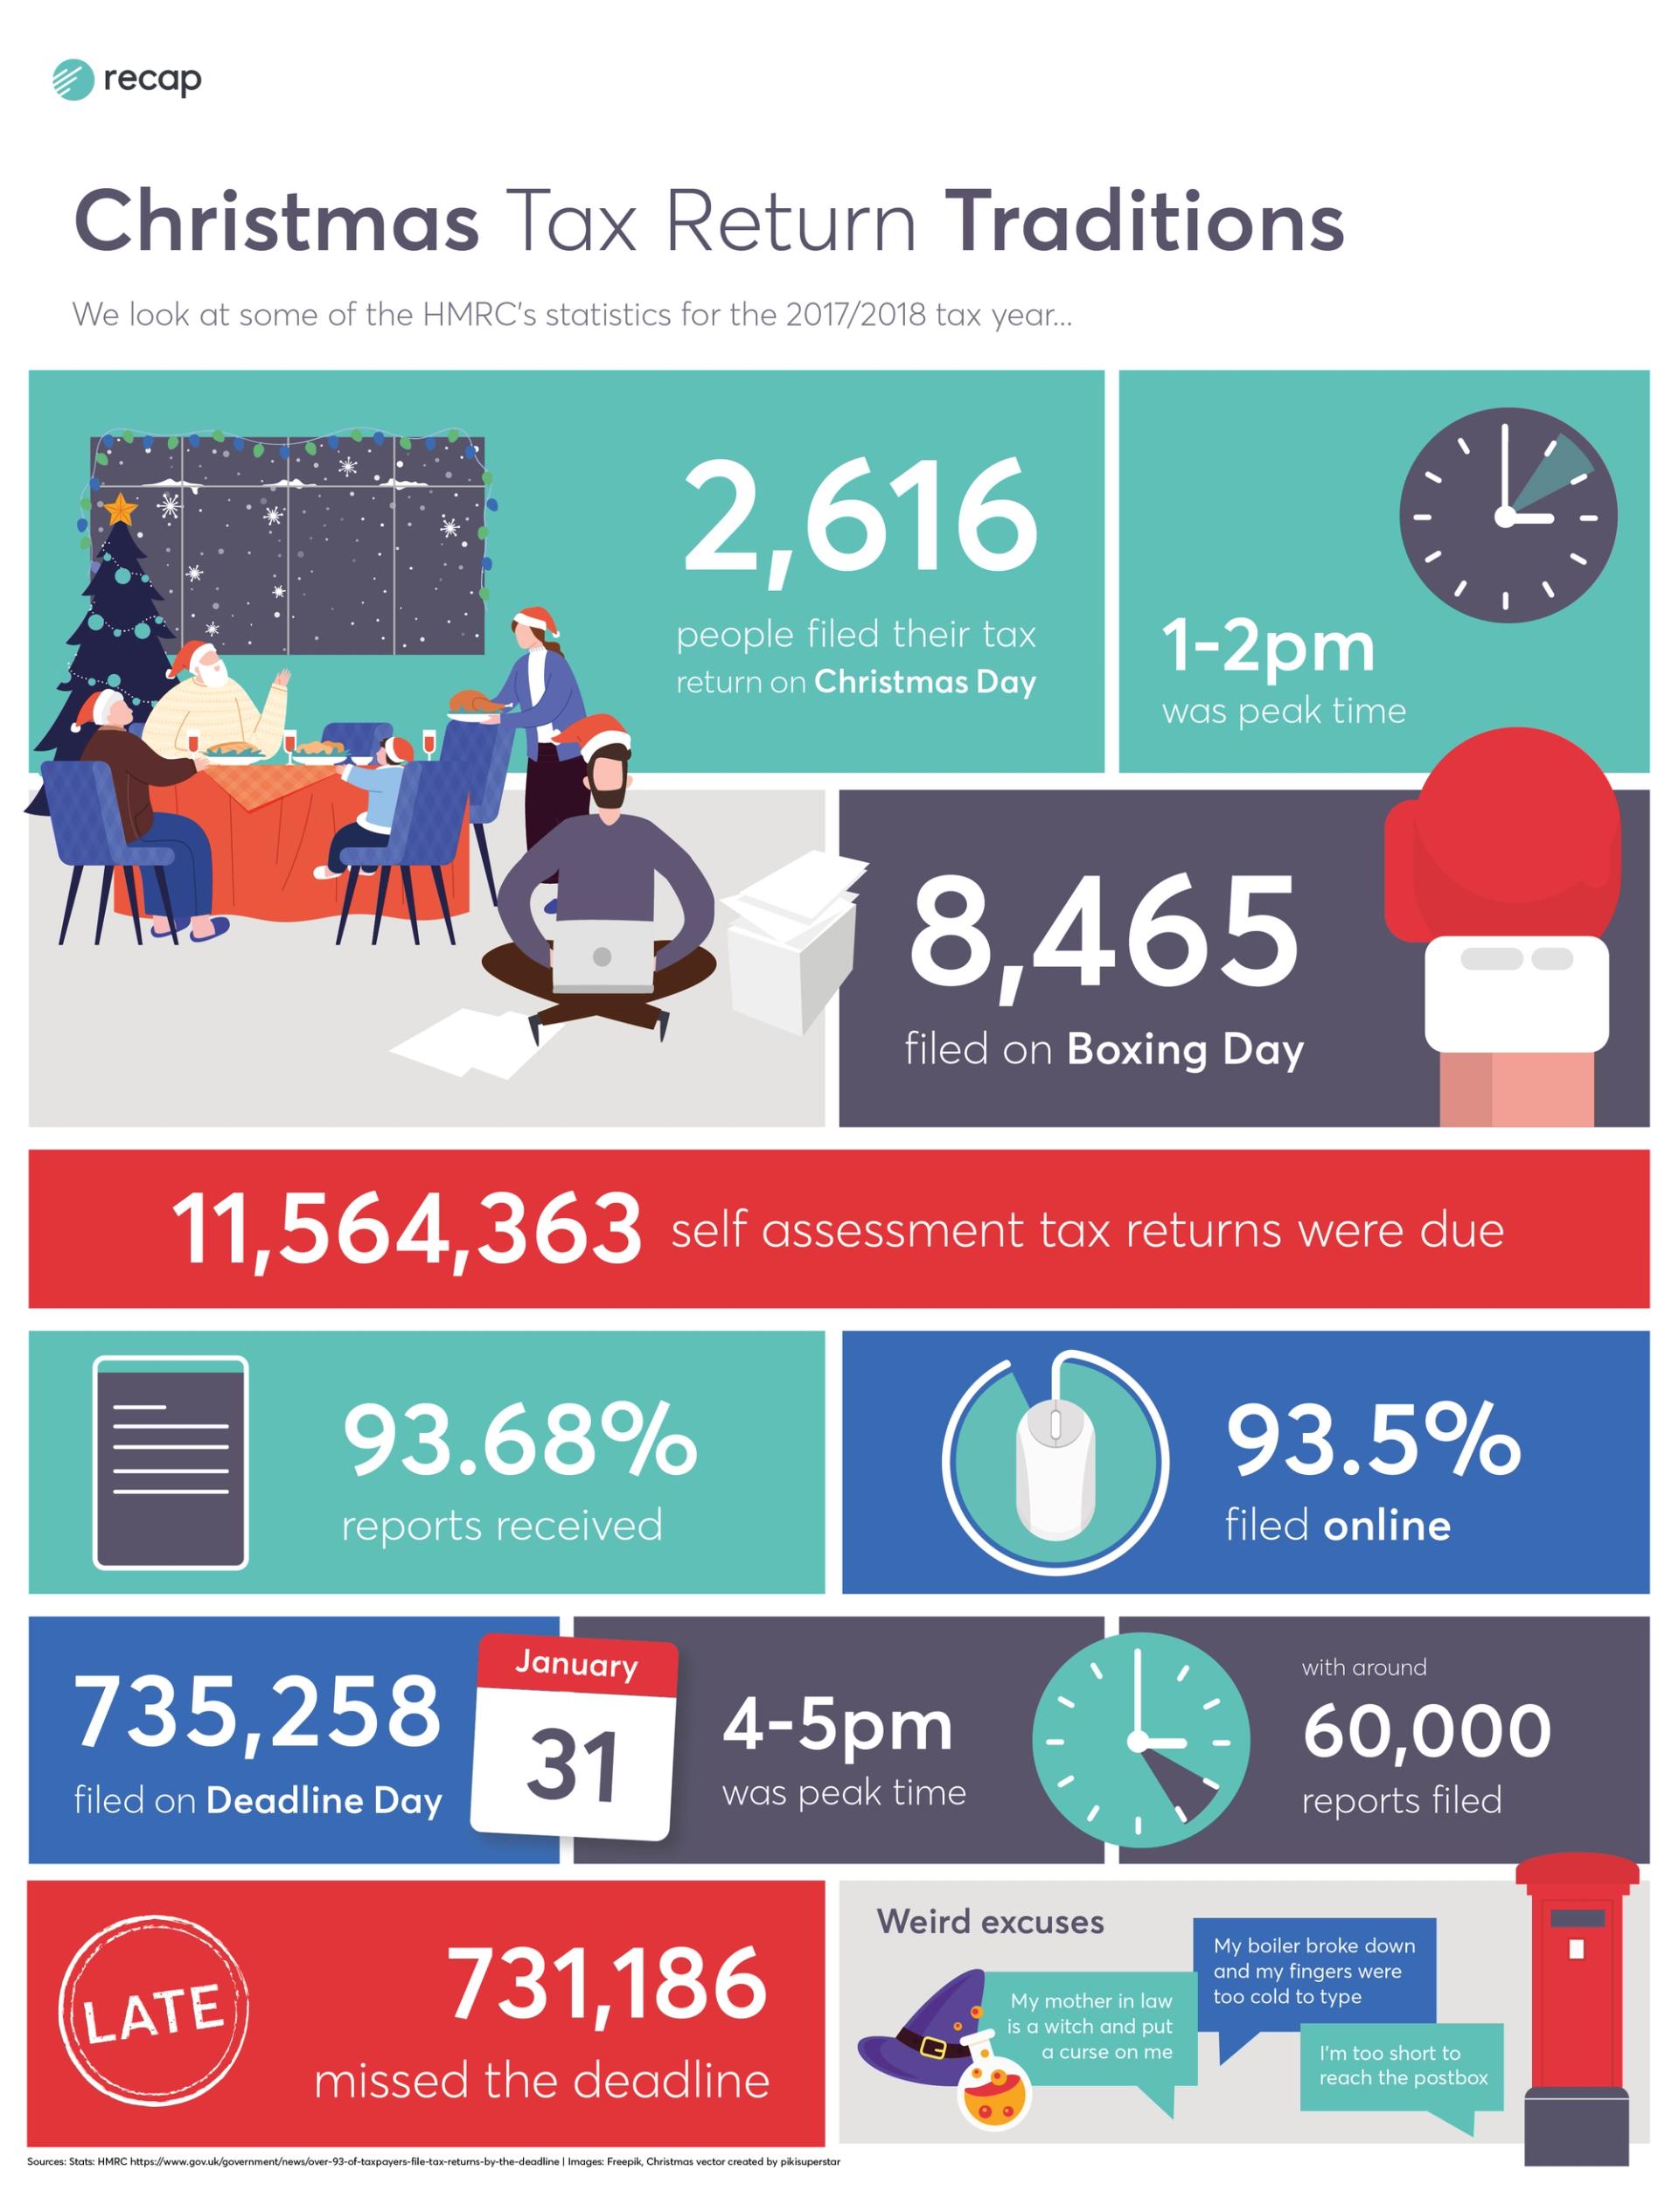 Recap infographic showing statistics about tax returns filed over the 2019 Christmas period in the UK.